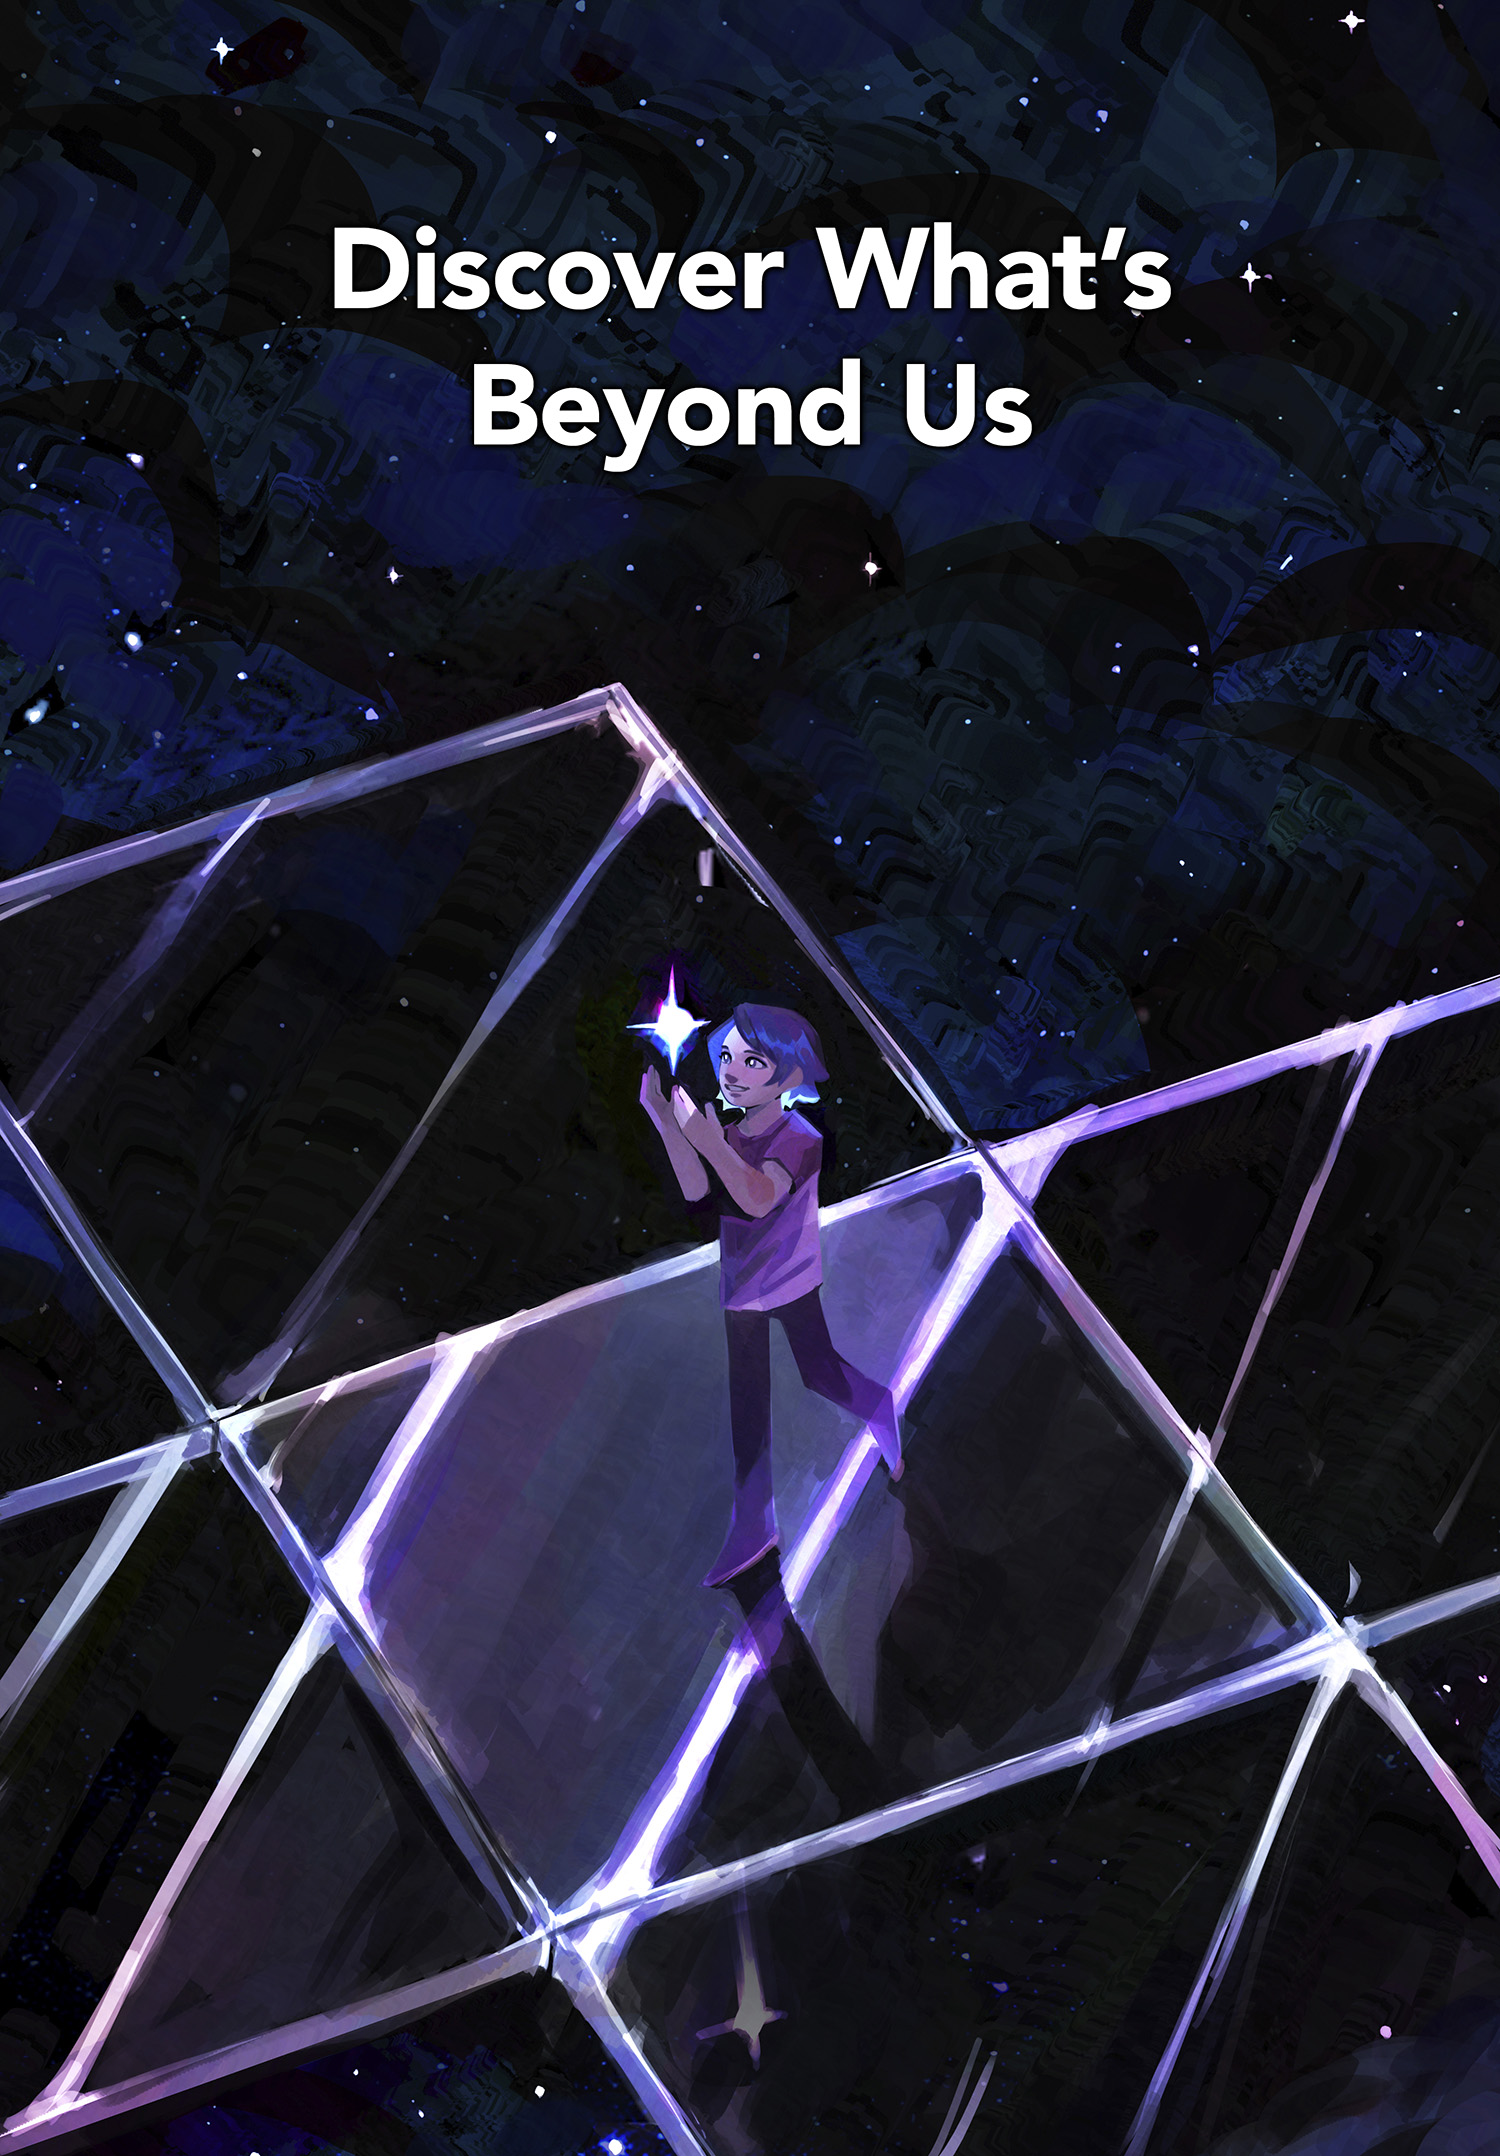 A girl on a opened glass cube holding a star.